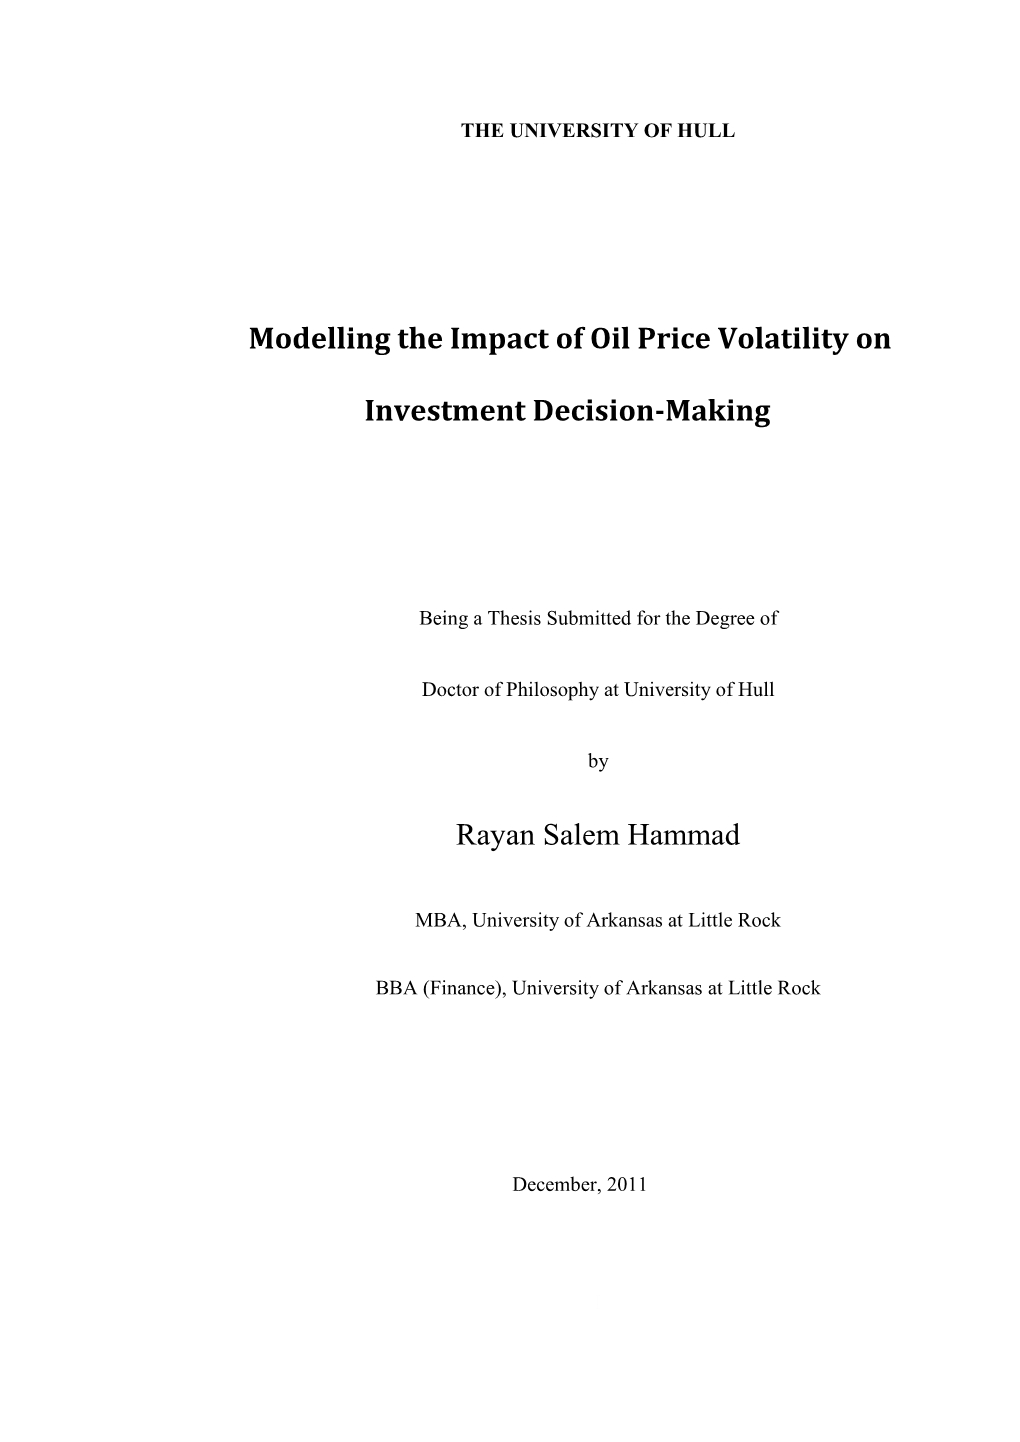 Modelling the Impact of Oil Price Volatility on Investment Decision